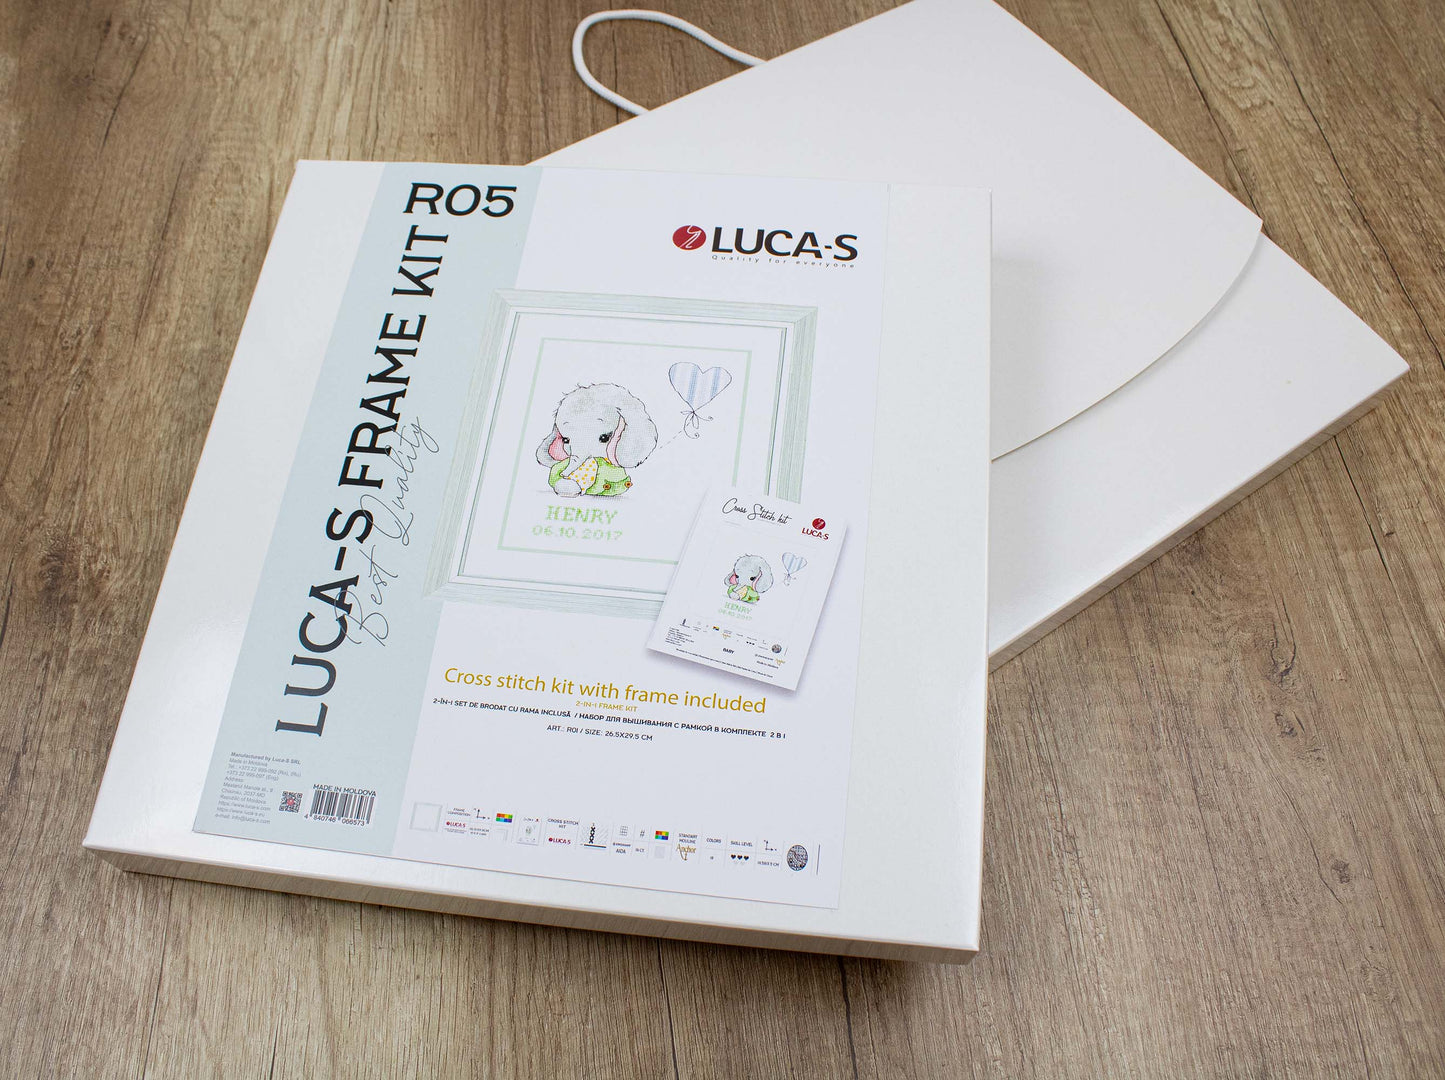 Cross Stitch Kit with Frame Included - Luca-S, R05